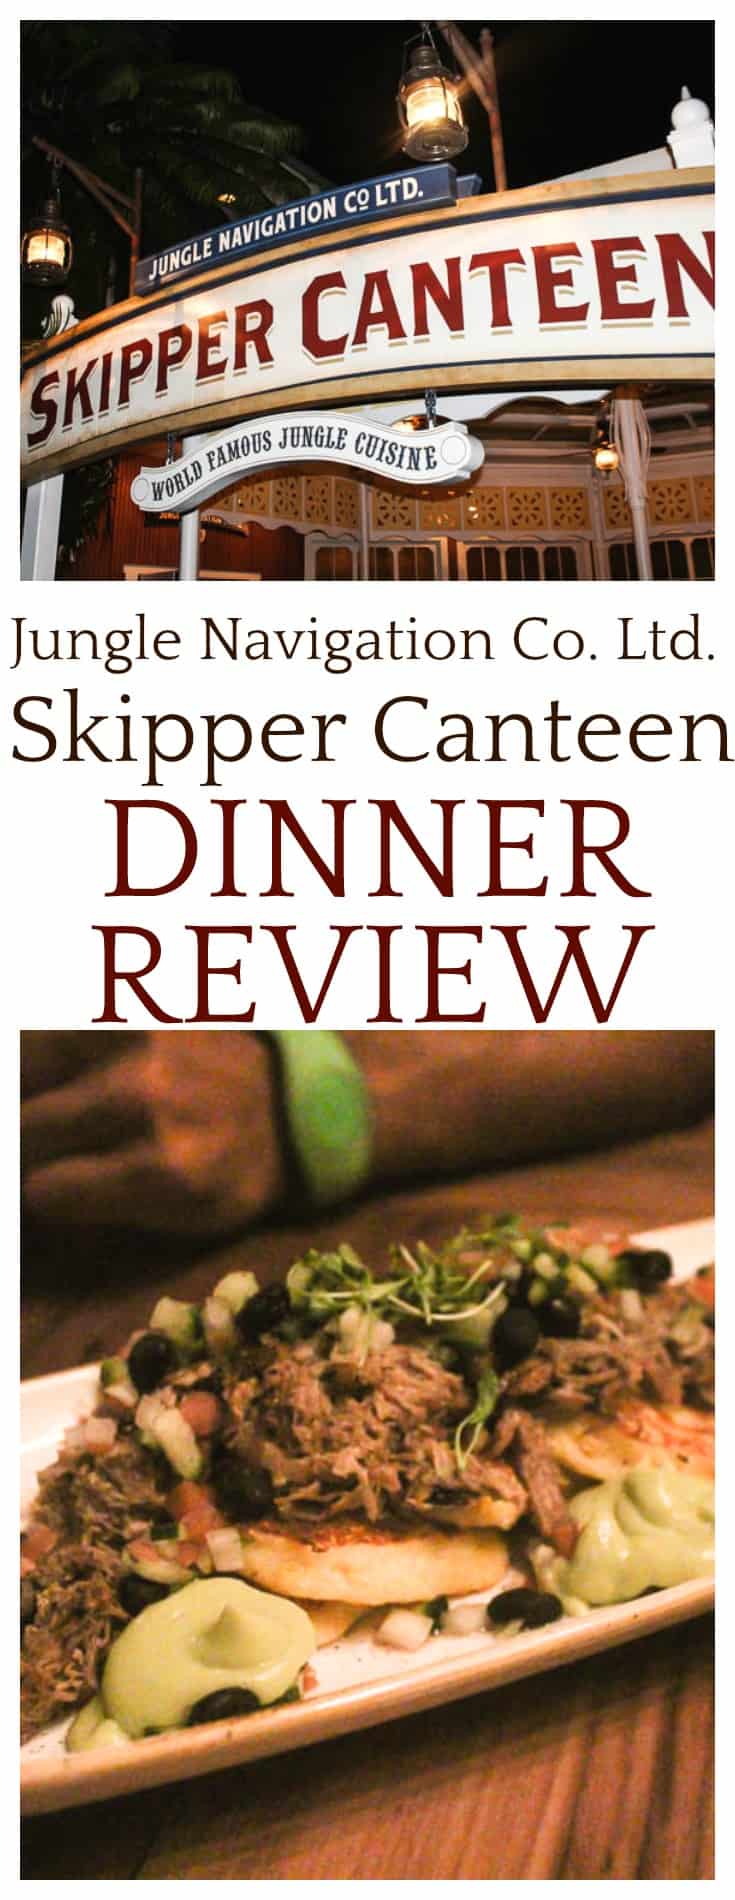 This Jungle Navigation Co. Ltd. Skipper Canteen dinner review is based on my experience when visiting the restaurant in November 2017 with my family. This restaurant can be found at Walt Disney World inside the Magic Kingdom Park.